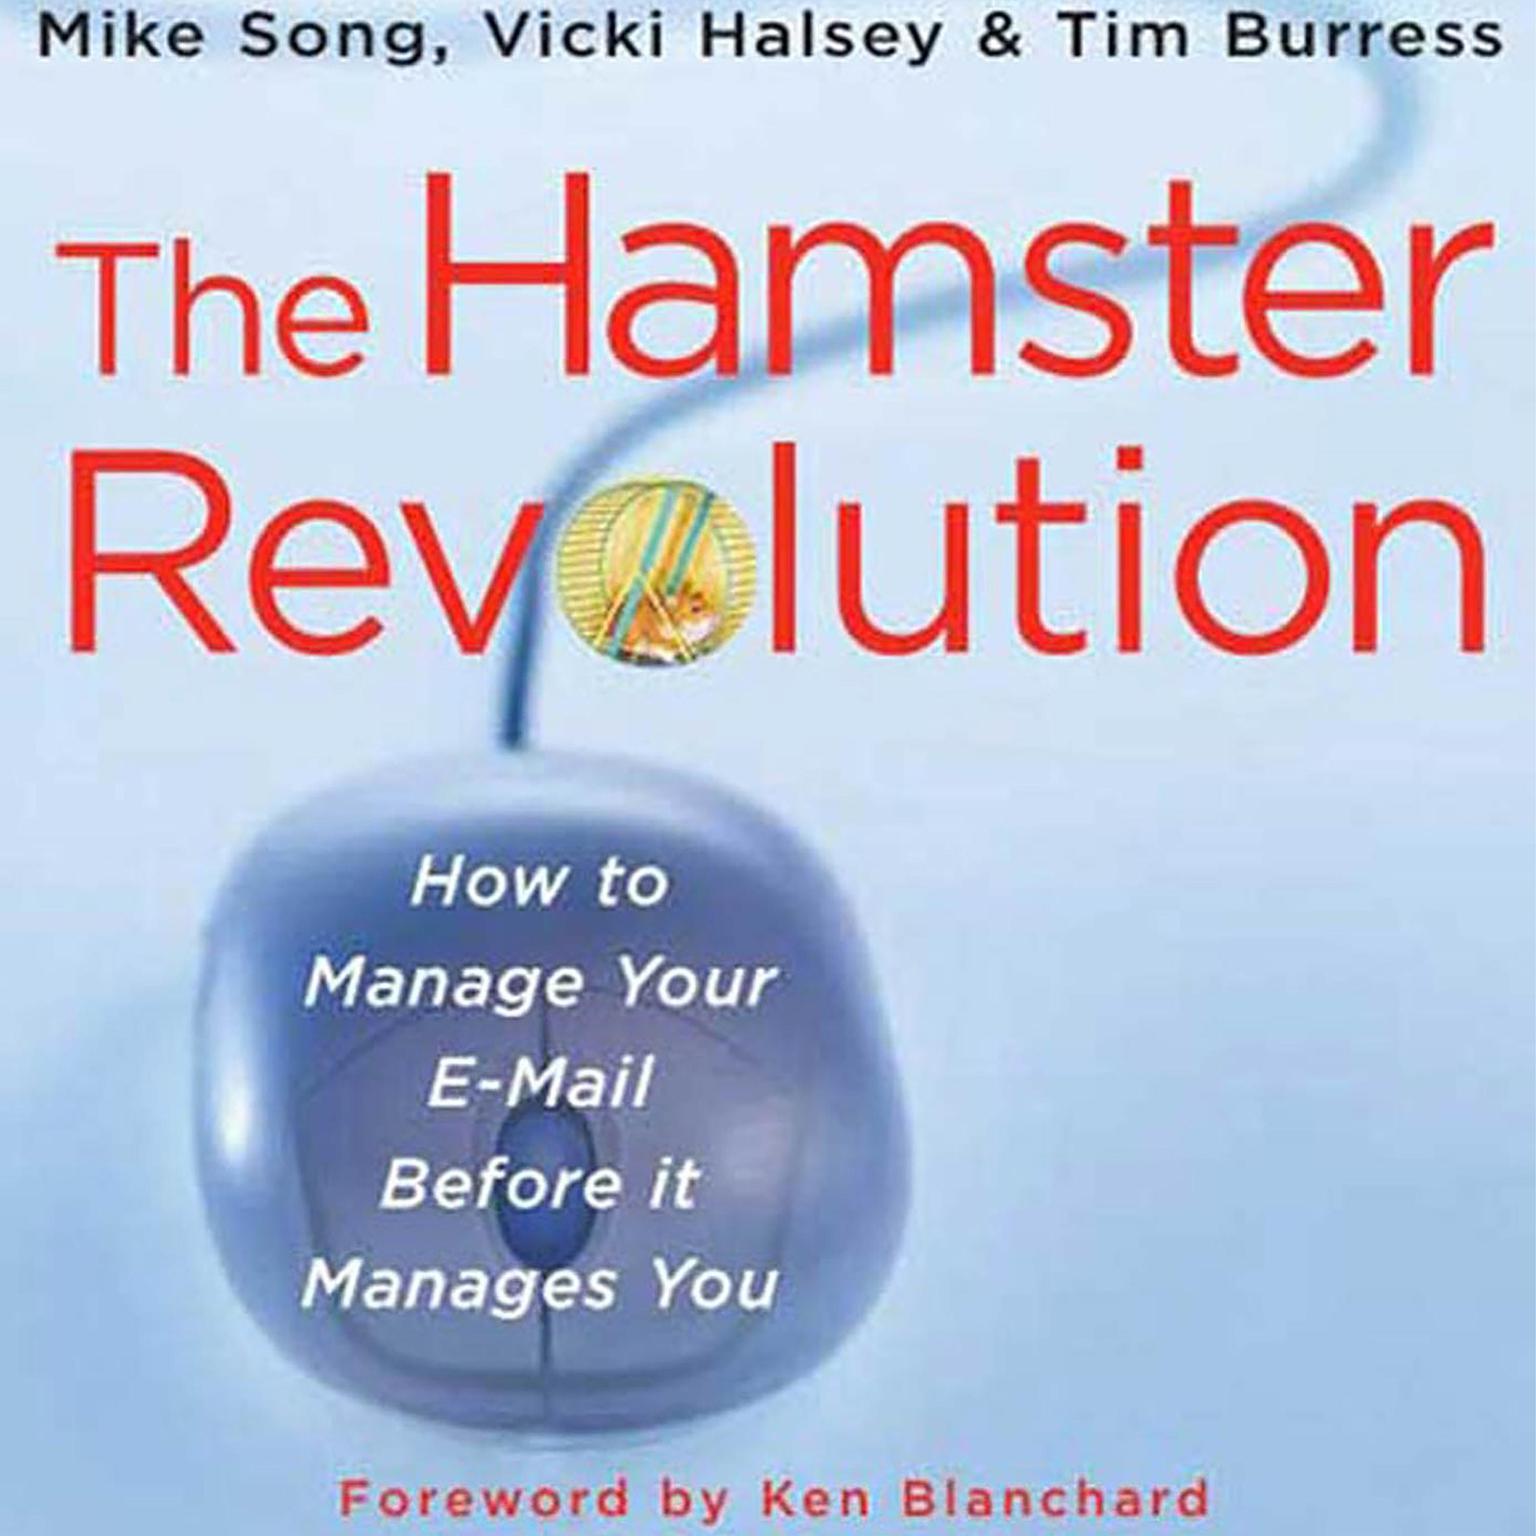 The Hamster Revolution: How to manage your email before it manages you Audiobook, by Mike Song